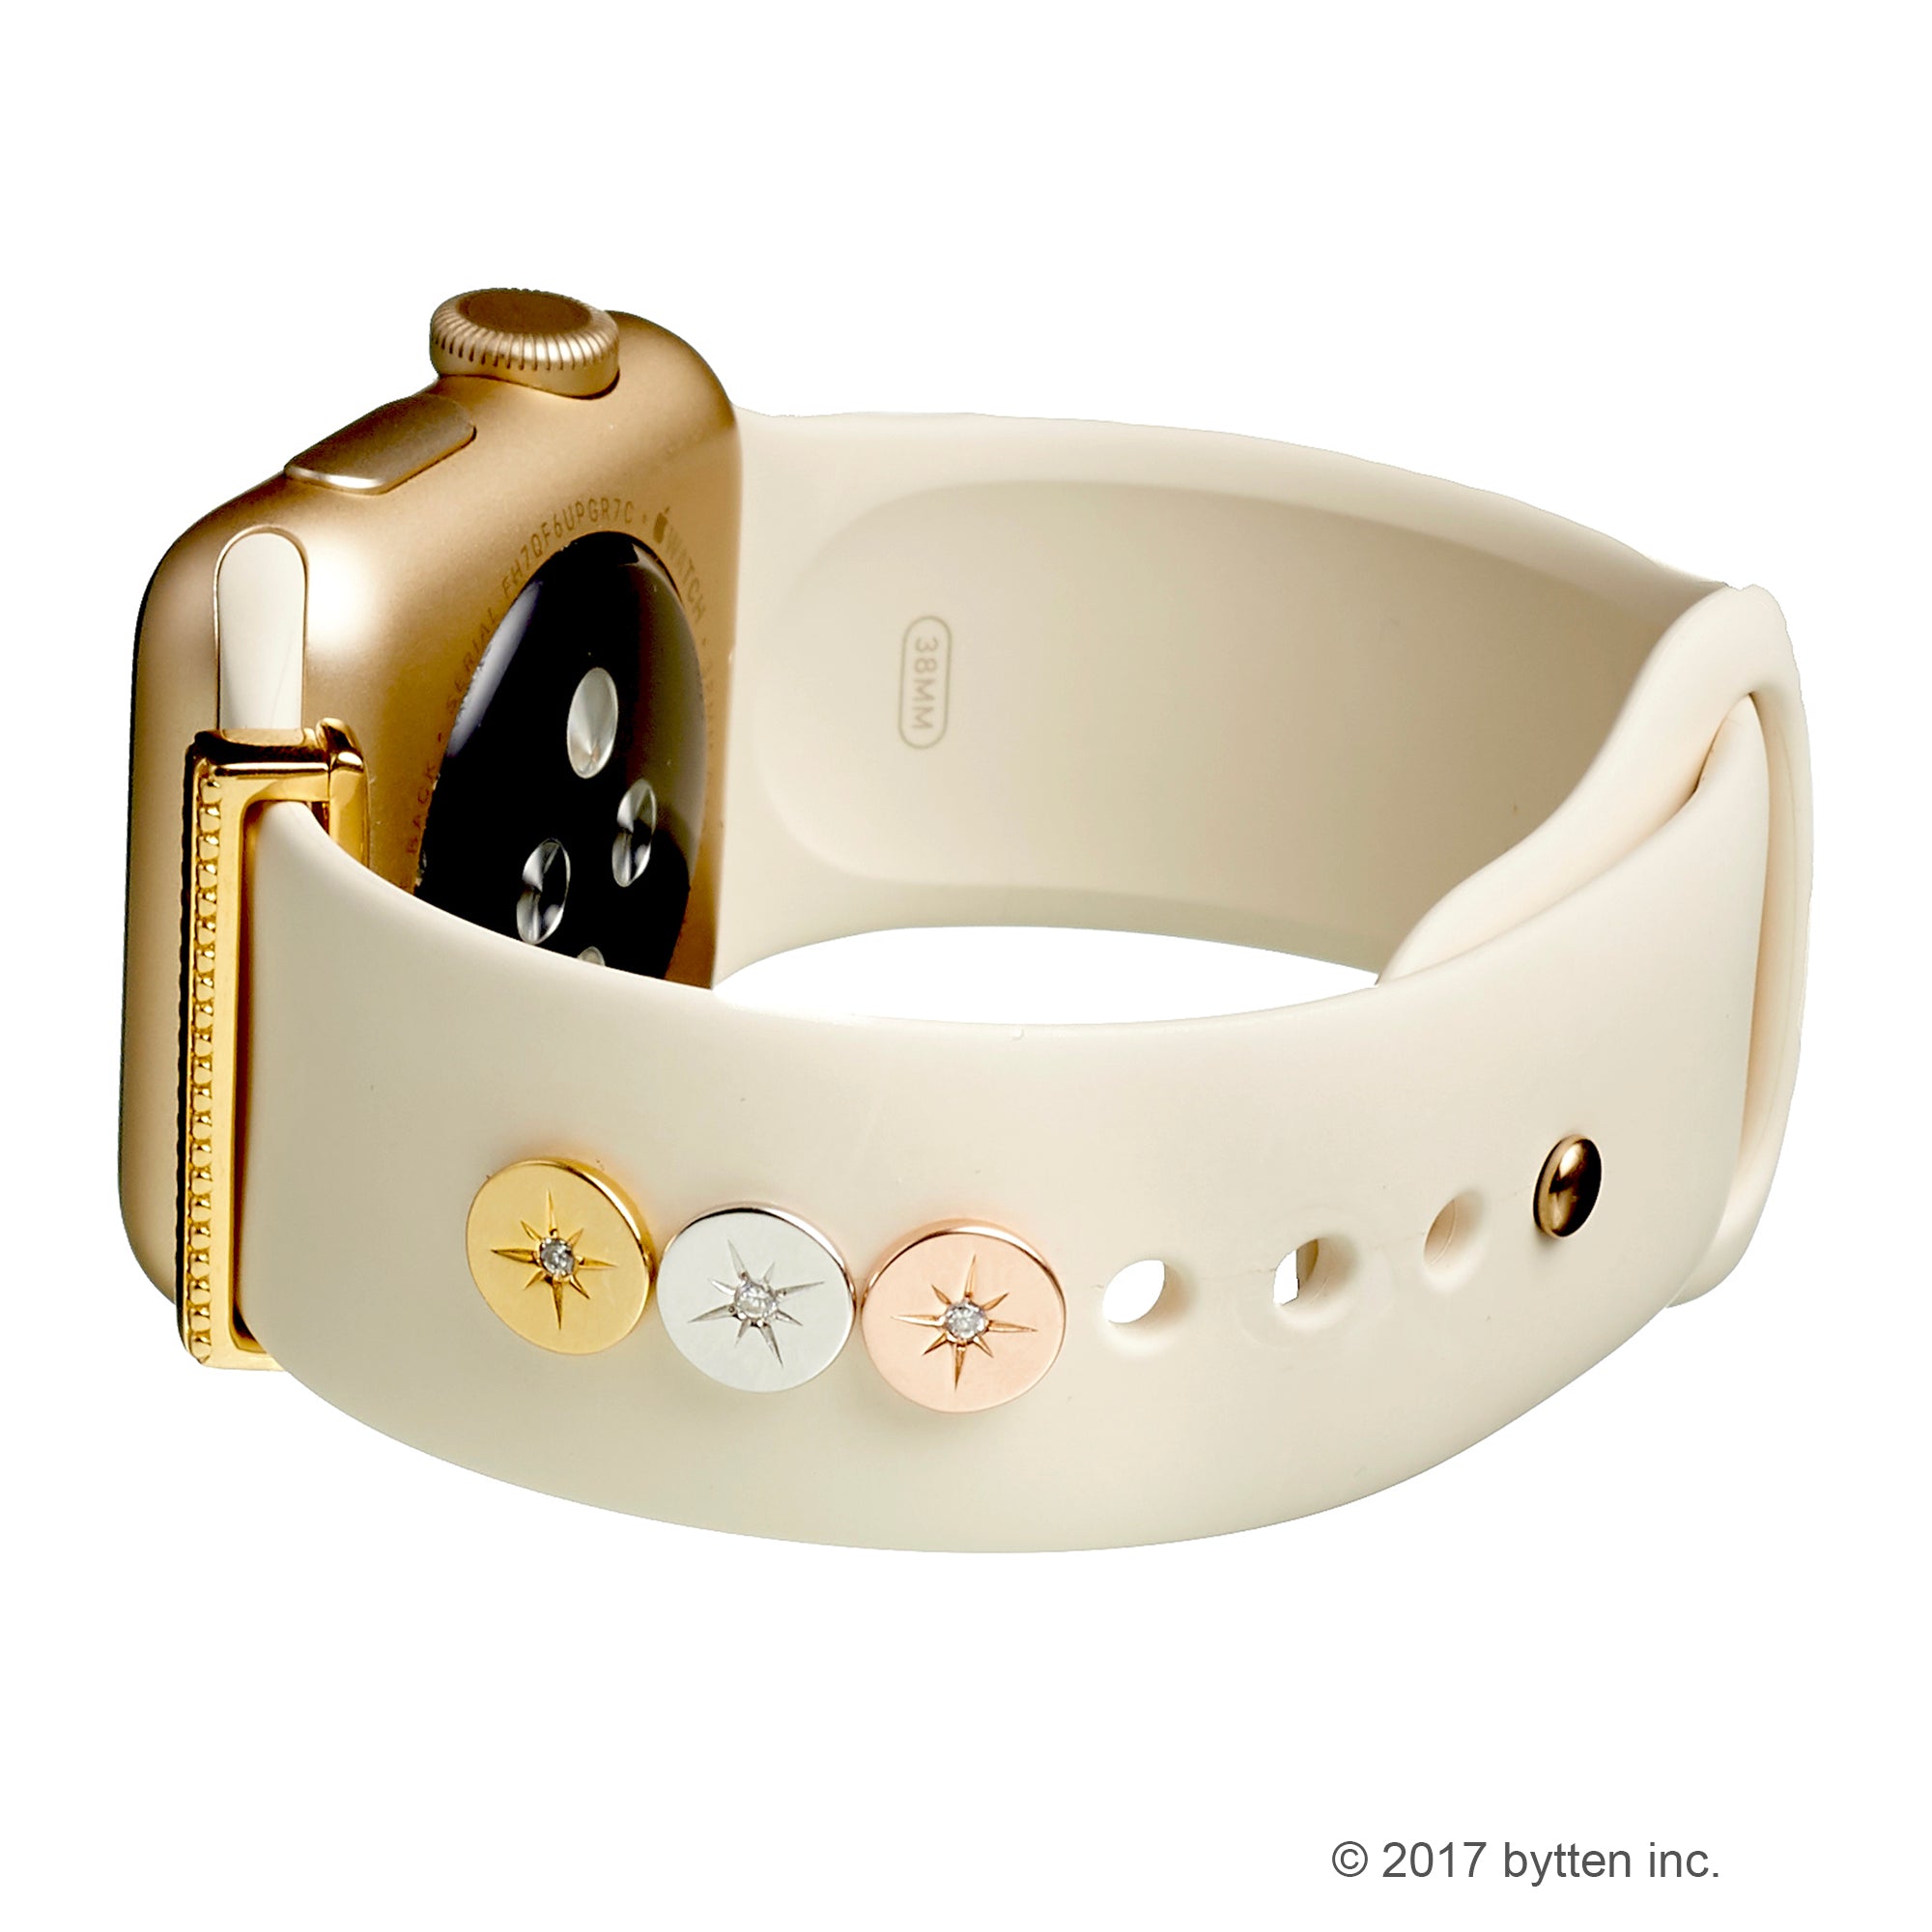 bytten apple watch starburst iwatch charms in rose gold, silver and gold